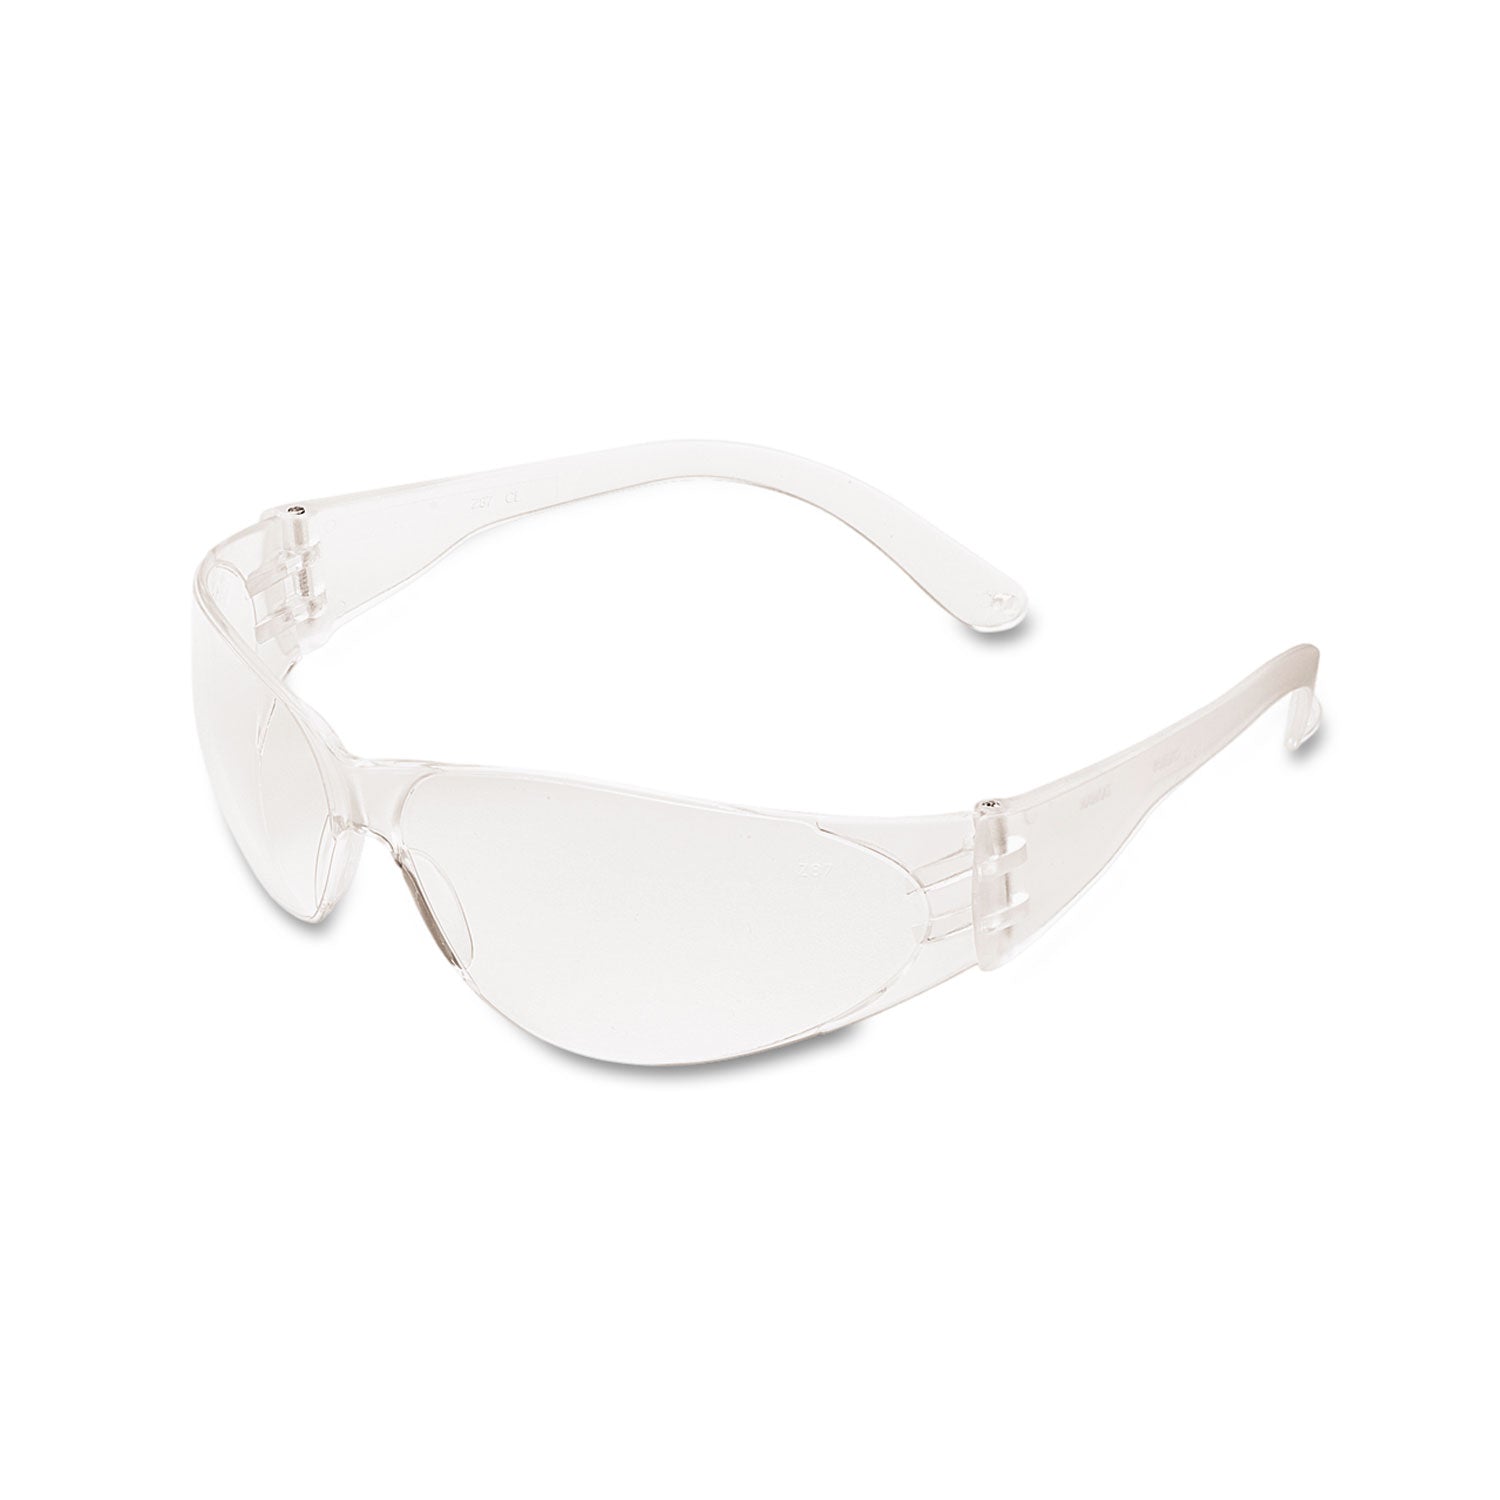 Checklite Scratch-Resistant Safety Glasses, Clear Lens - 